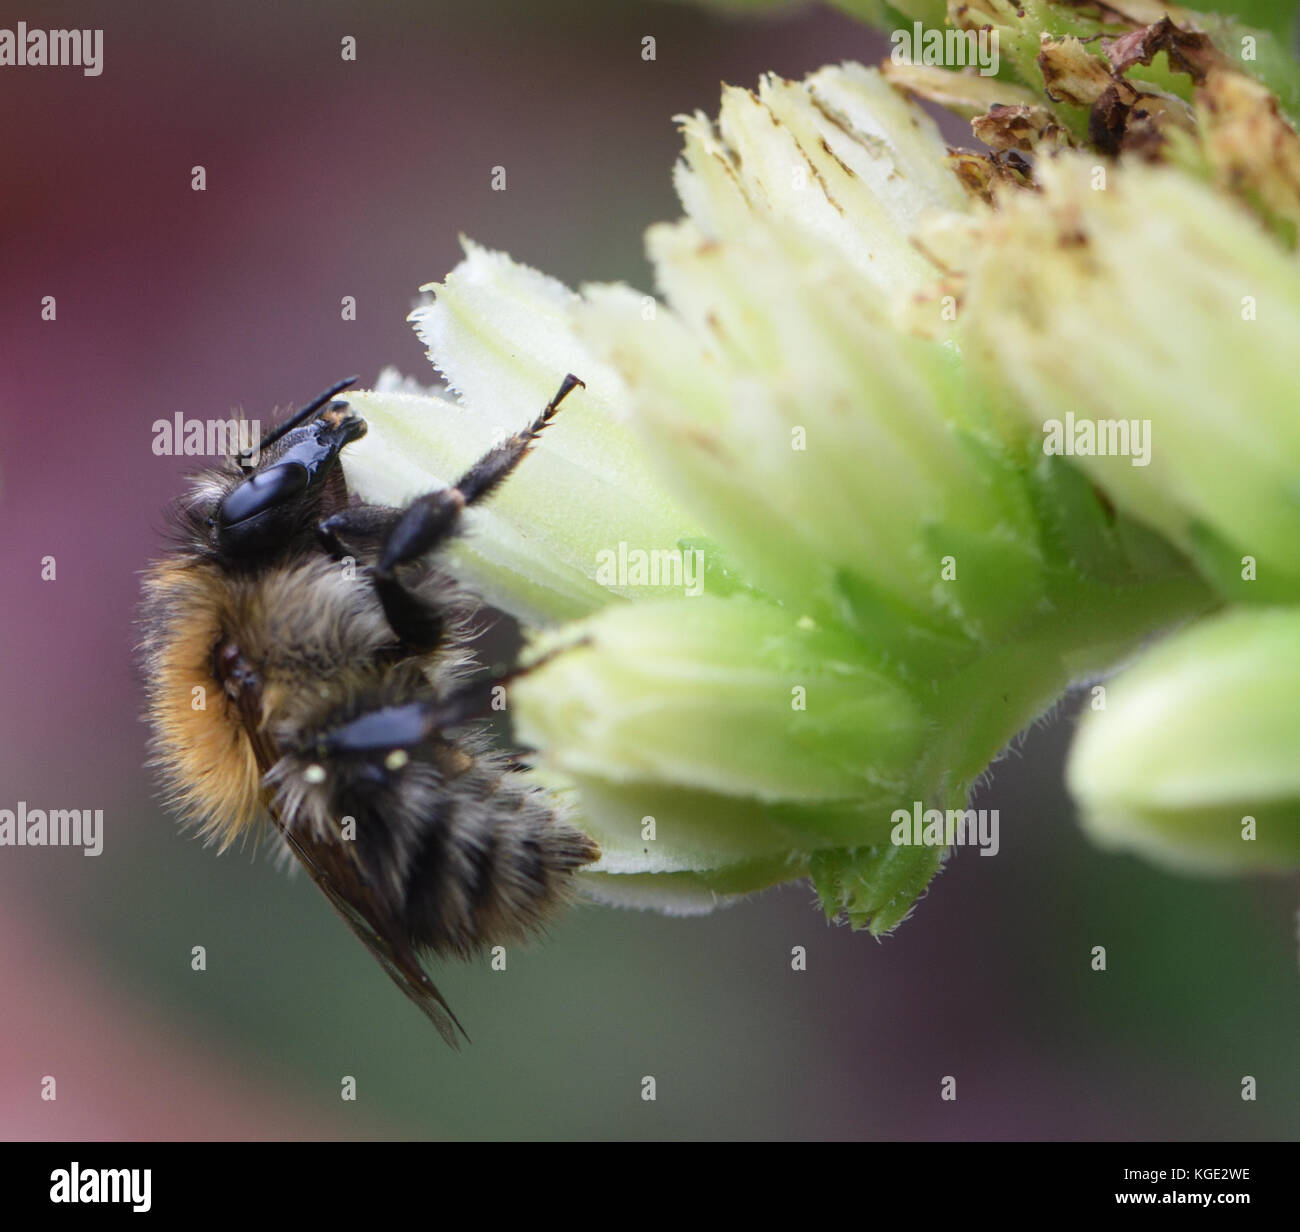 A Common Carder Bee (Bombus pascuorum) foraging on a houseleek (Sempervivum species) flower. Bedgebury Forest, Kent, UK. Stock Photo